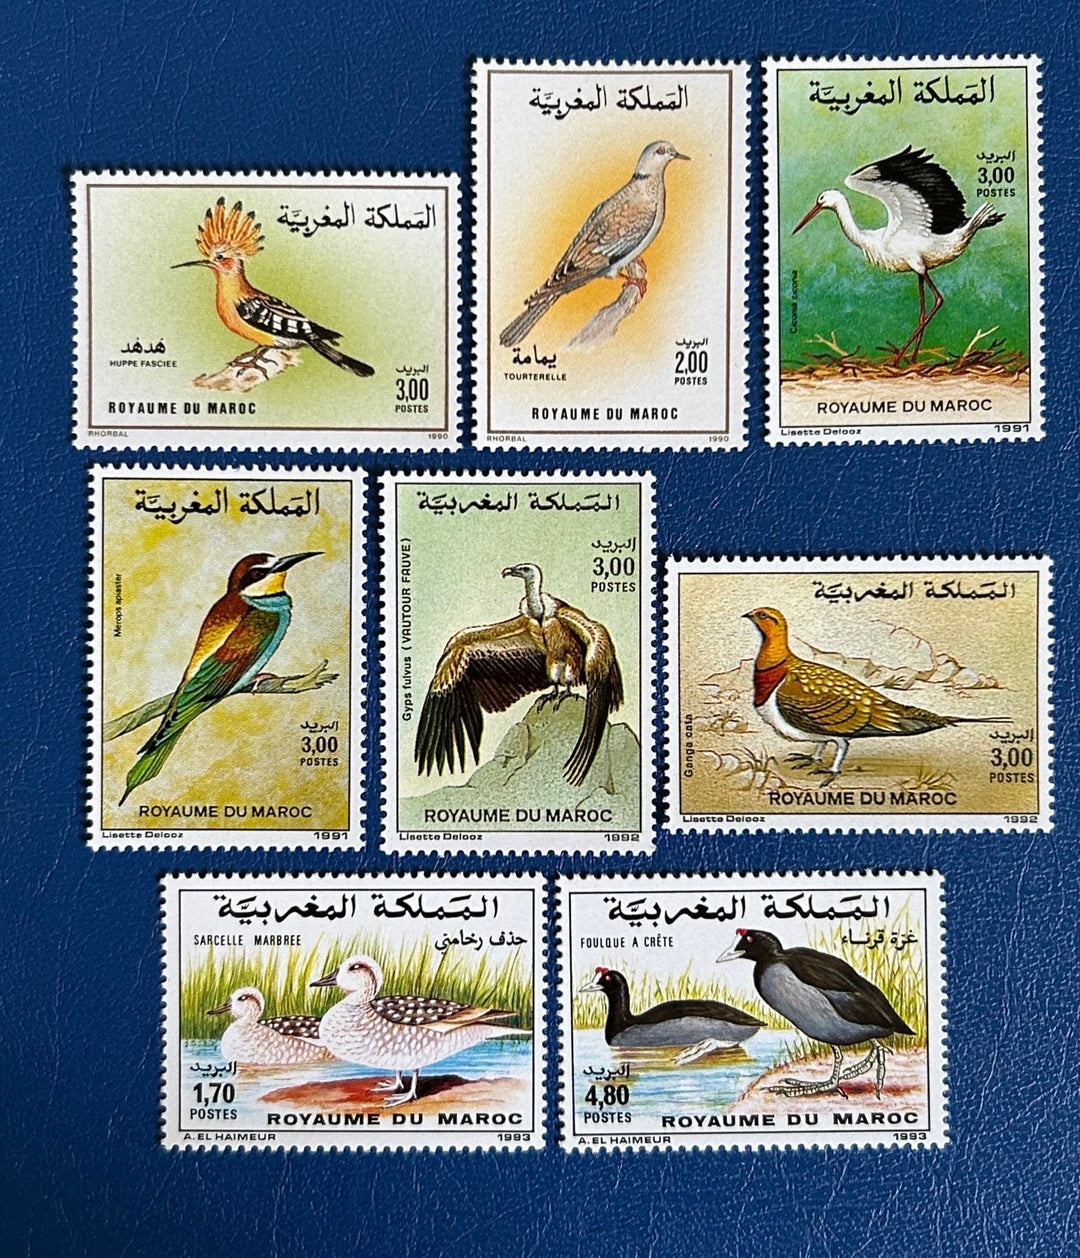 Morocco - Original Vintage Postage Stamps- 1990-93 - Birds -for the collector, artist or crafter